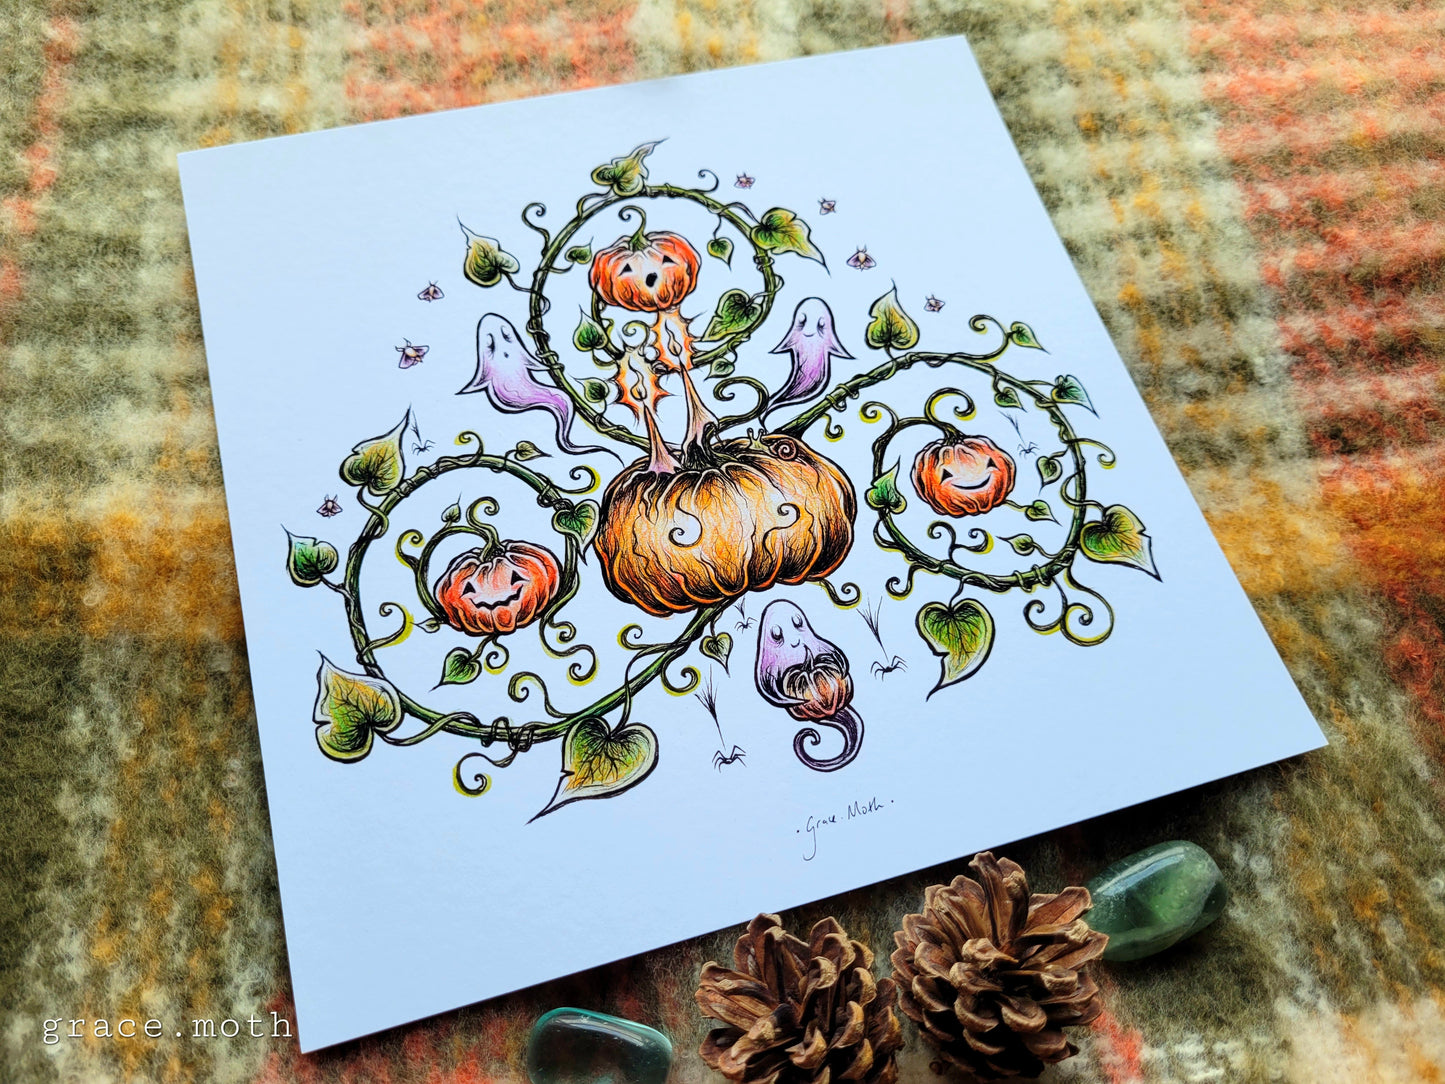 Pumpkin Patch - white background - Square art print by Grace Moth